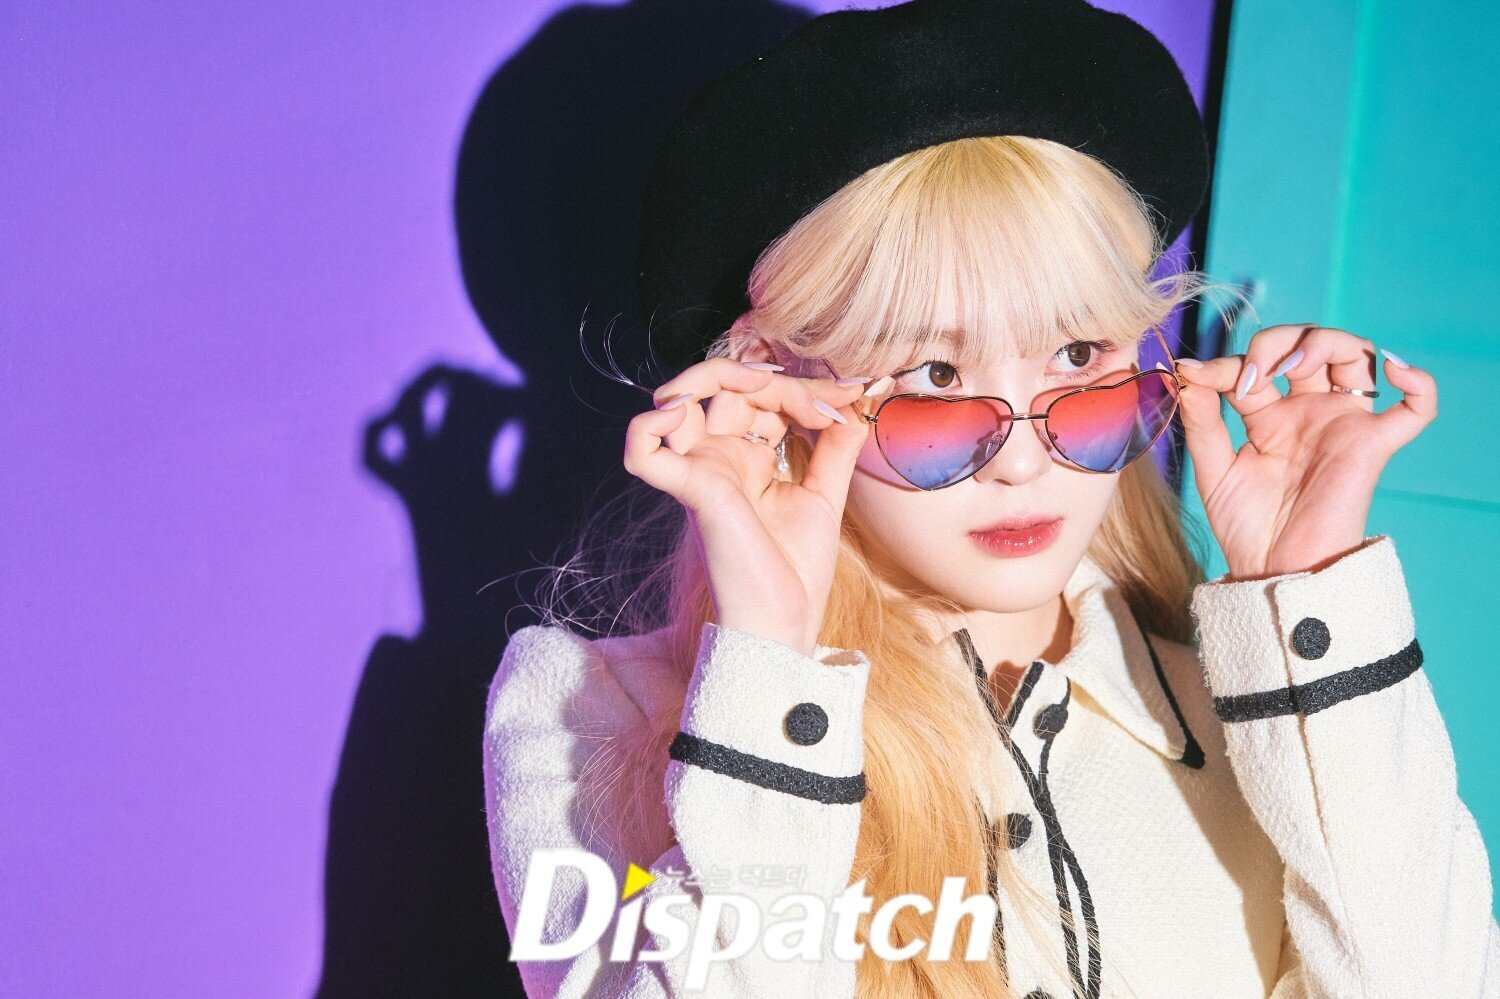 220226 Kep1er Hikaru - Debut Album 'FIRST IMPACT' Promotion Photoshoot by  Dispatch